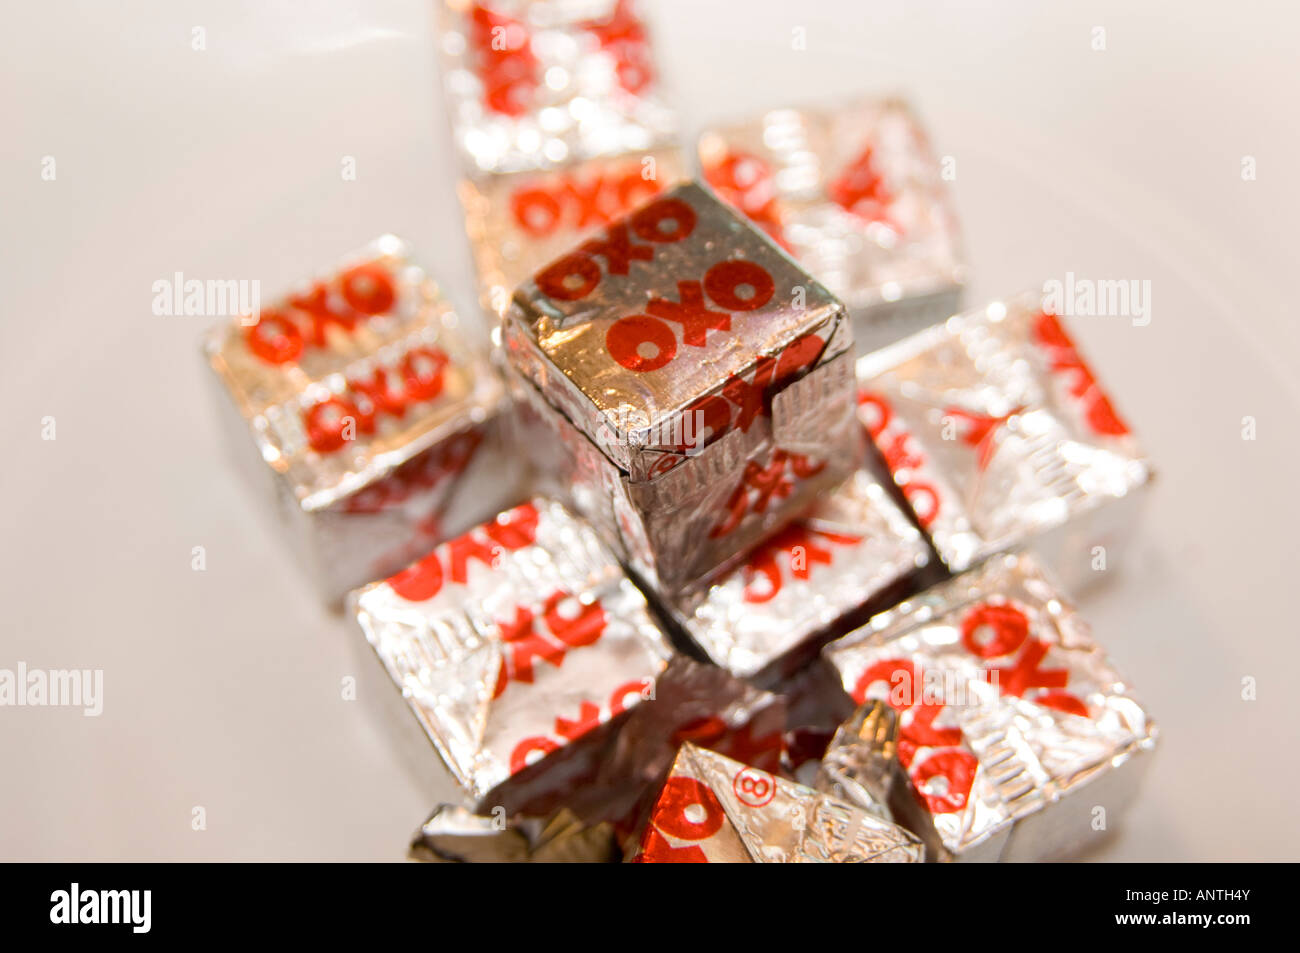 https://c8.alamy.com/comp/ANTH4Y/pile-of-silver-paper-wrapped-oxo-beef-stock-cubes-on-plate-ANTH4Y.jpg